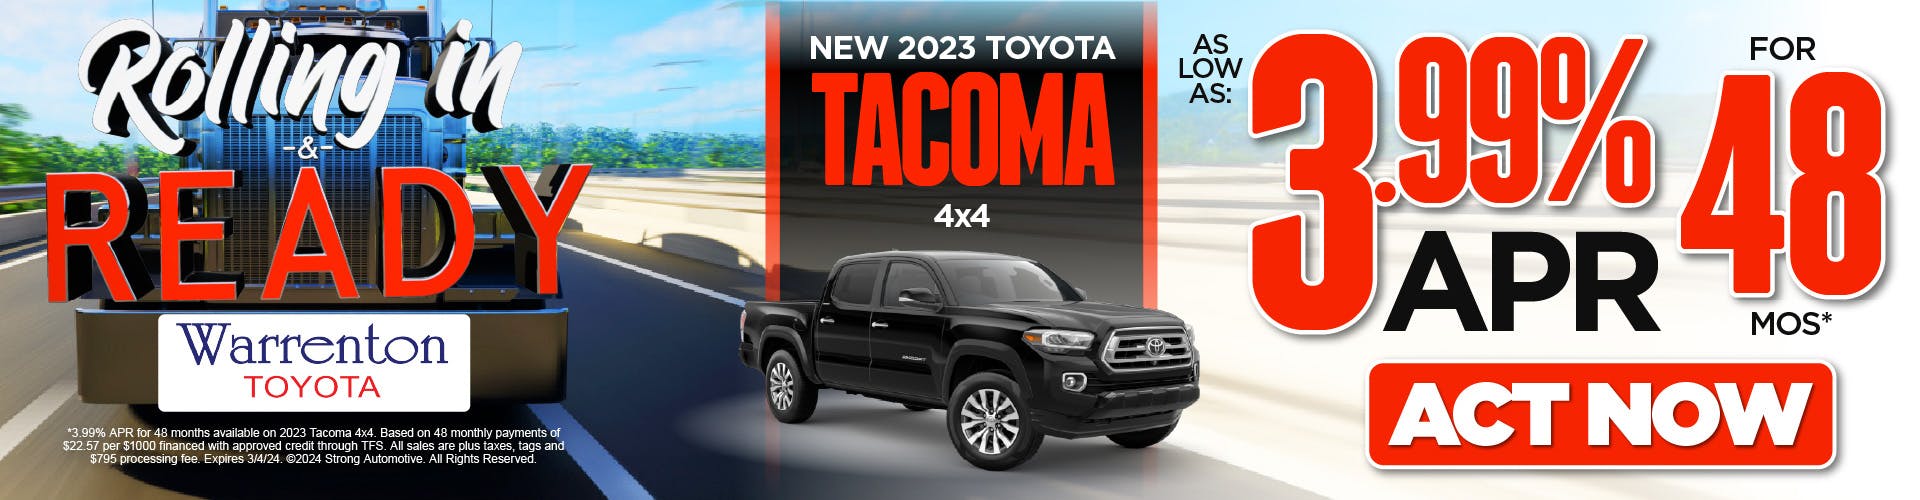 NEW 2023 TOYOTA TACOMAS 4X4 – 3.99% APR FOR 48 MONTHS*